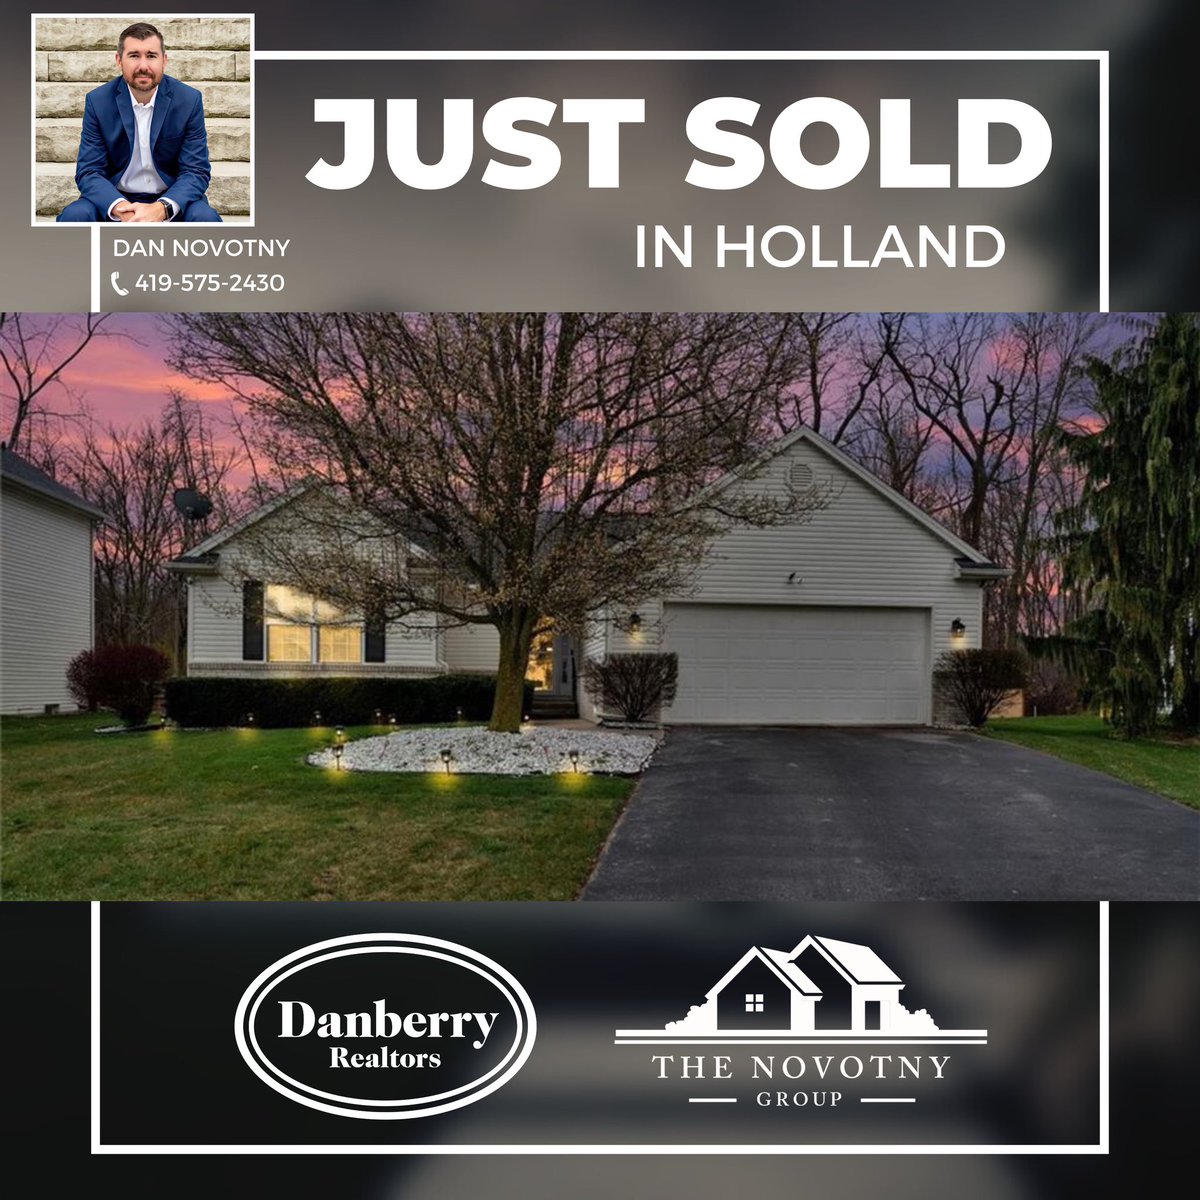 ✨✨Just Sold✨✨

Congrats to my buyers on closing this beautiful Holland Home!! 🏠 💯

#happy #realtorlife #grateful #bravo #closing #realtor #justsold #🏡 #dannovotny #sold  #dothework #firsttimehomebuyer #maumee #happybuyer #millennials #thenovotnygroup #realestate #toledo…